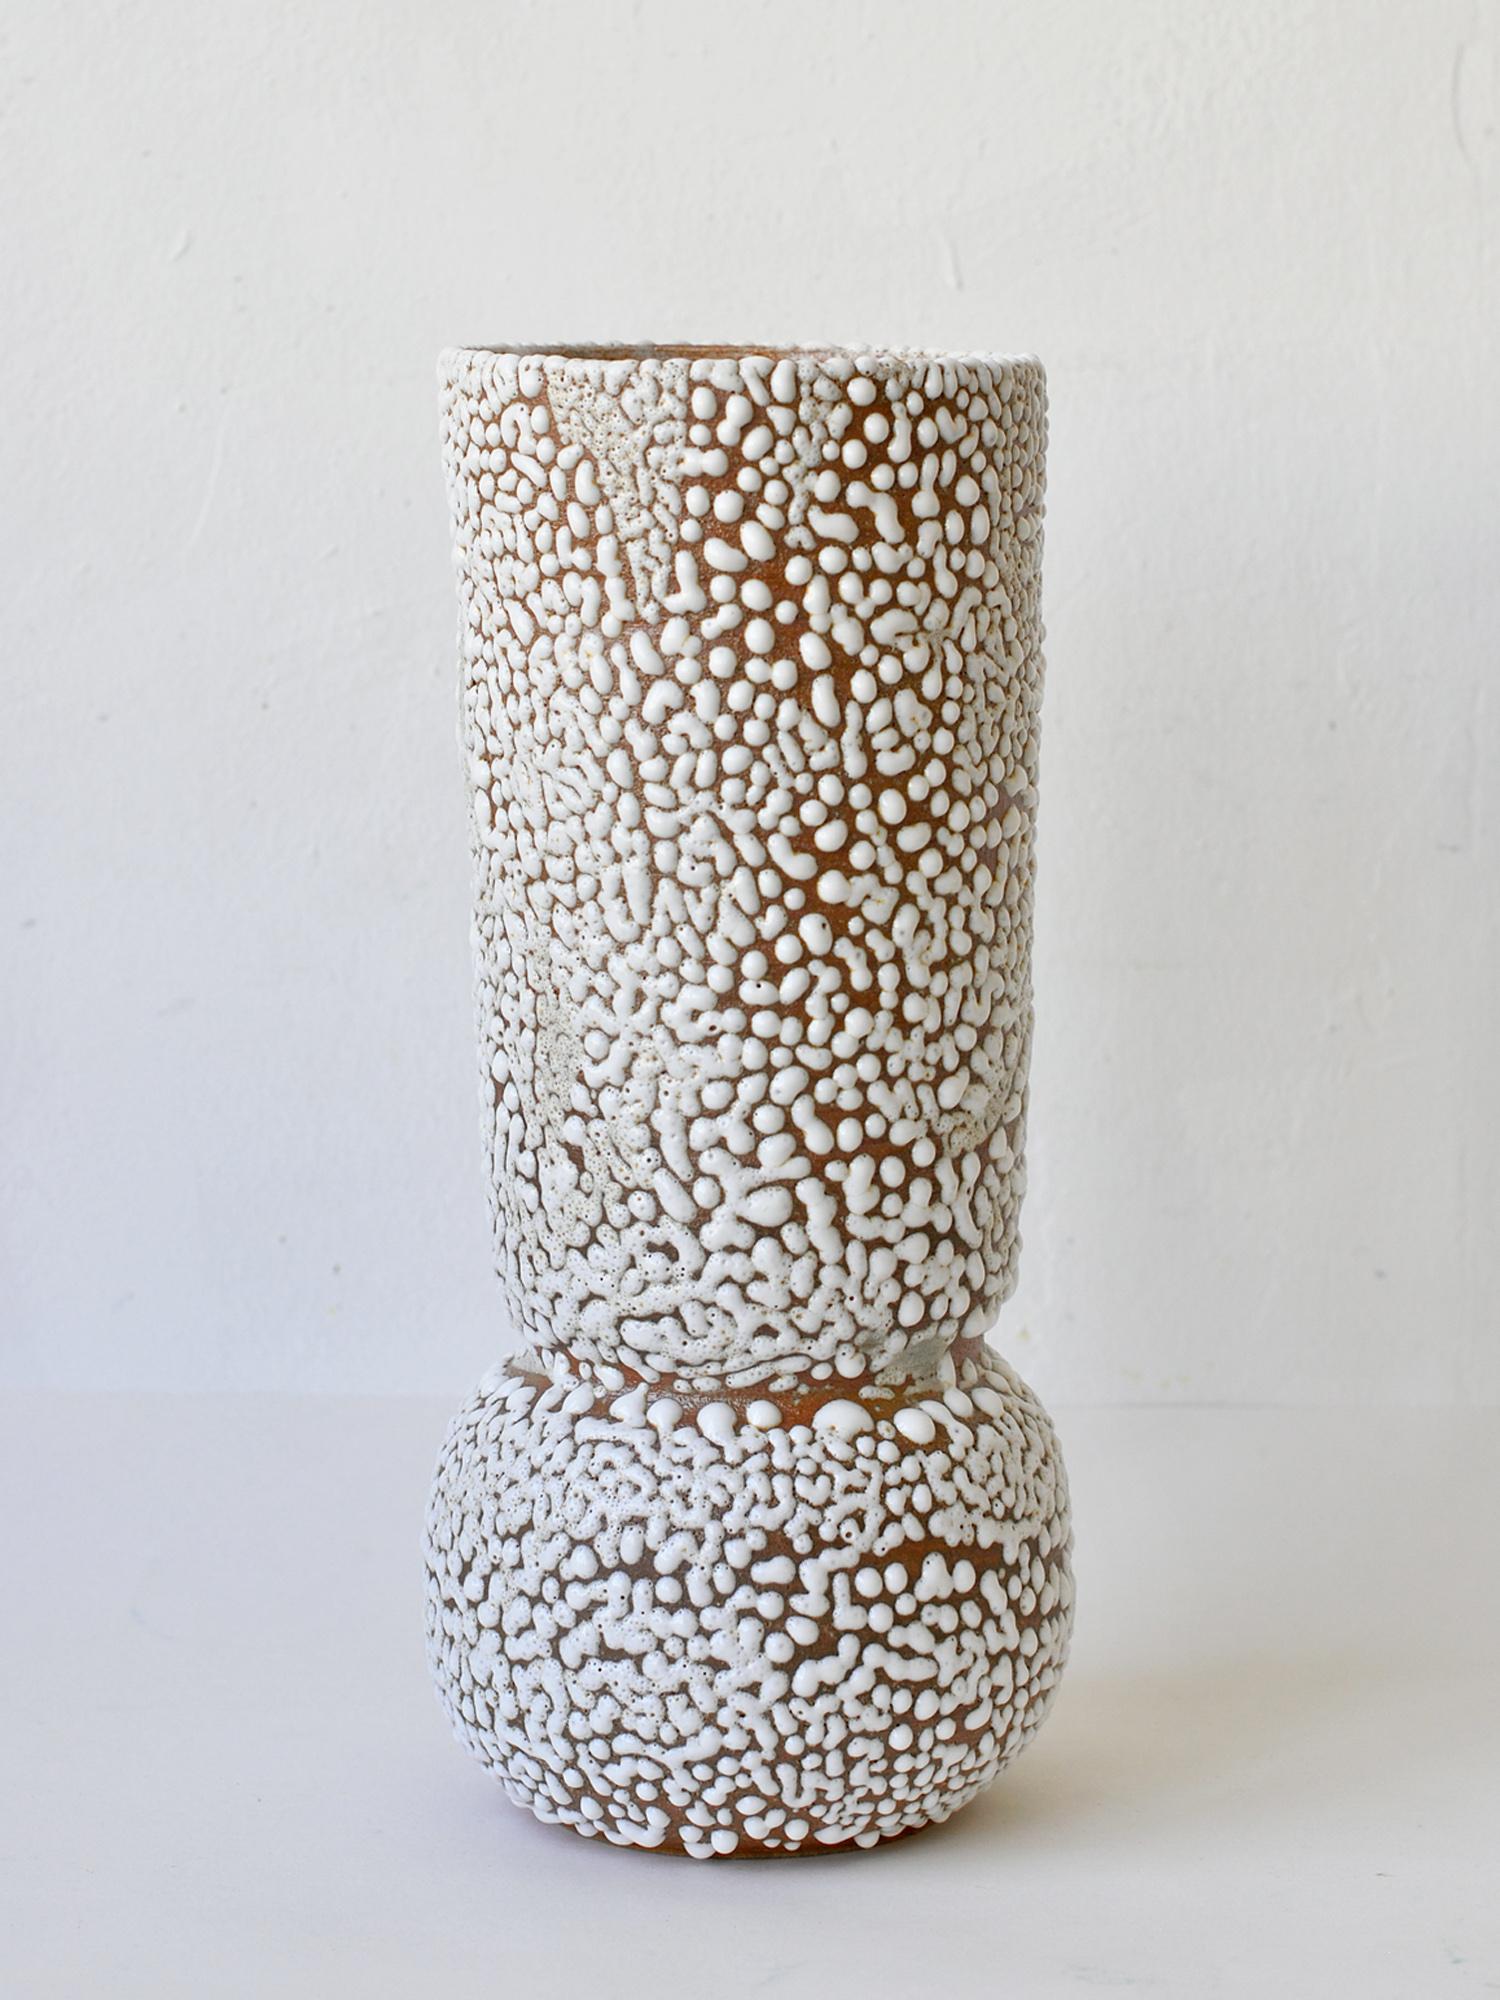 C-015 White Stoneware Vase by Moïo Studio
Dimensions: D14 x W14 x H30 cm
Materials: White crawl glaze on tan stoneware
Made by hand on the wheel
Unique piece, consult for multiples

Is the Berlin-based ceramic art studio of French-Palestinian